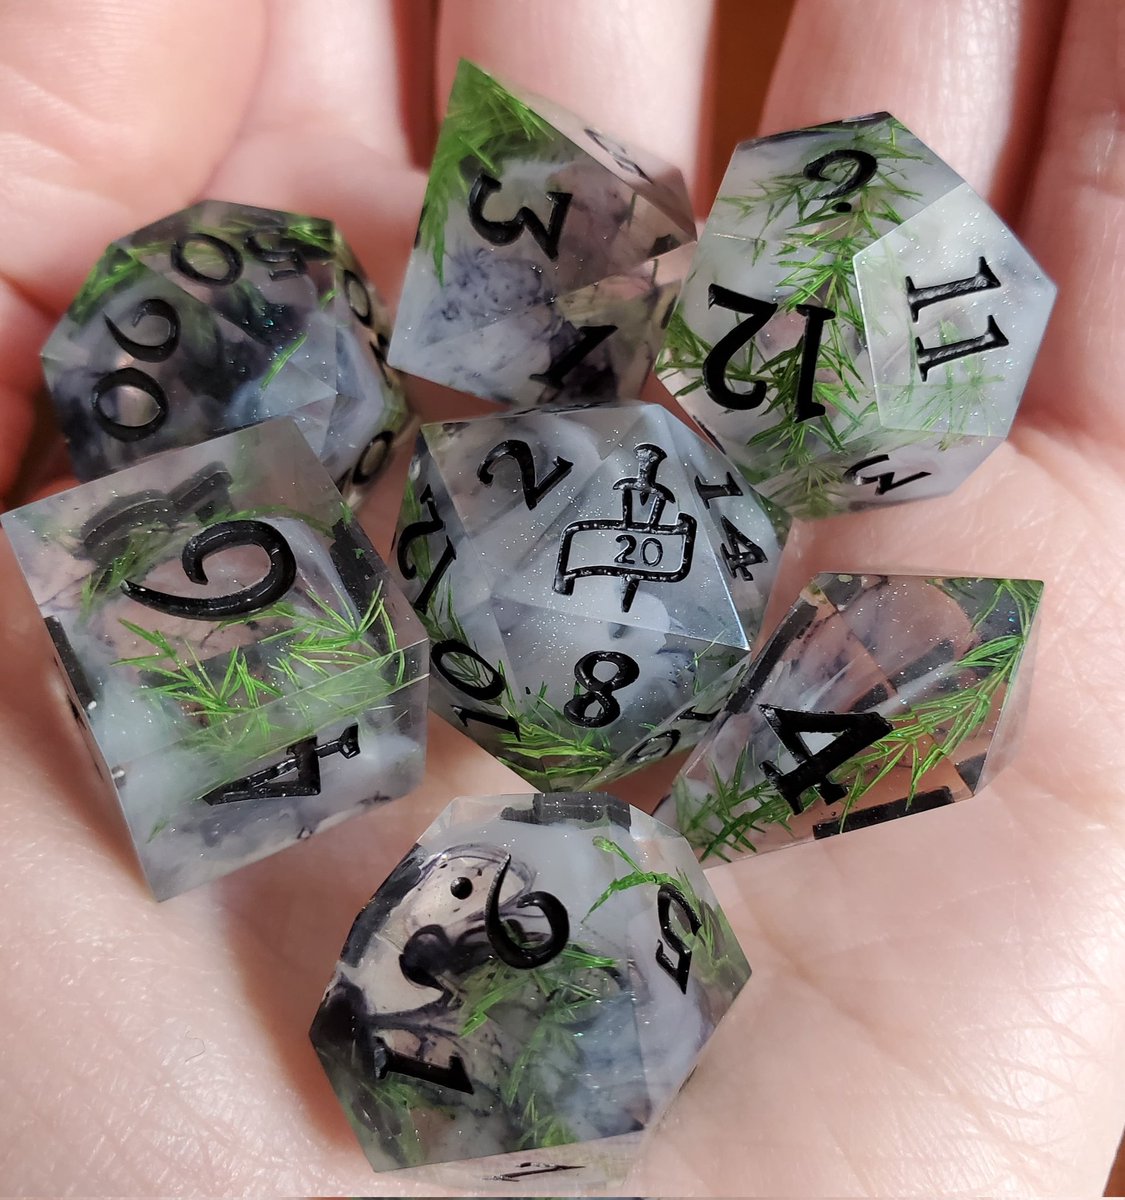 A set of dice with green leaves, white and black swirls, and black painted numbers.